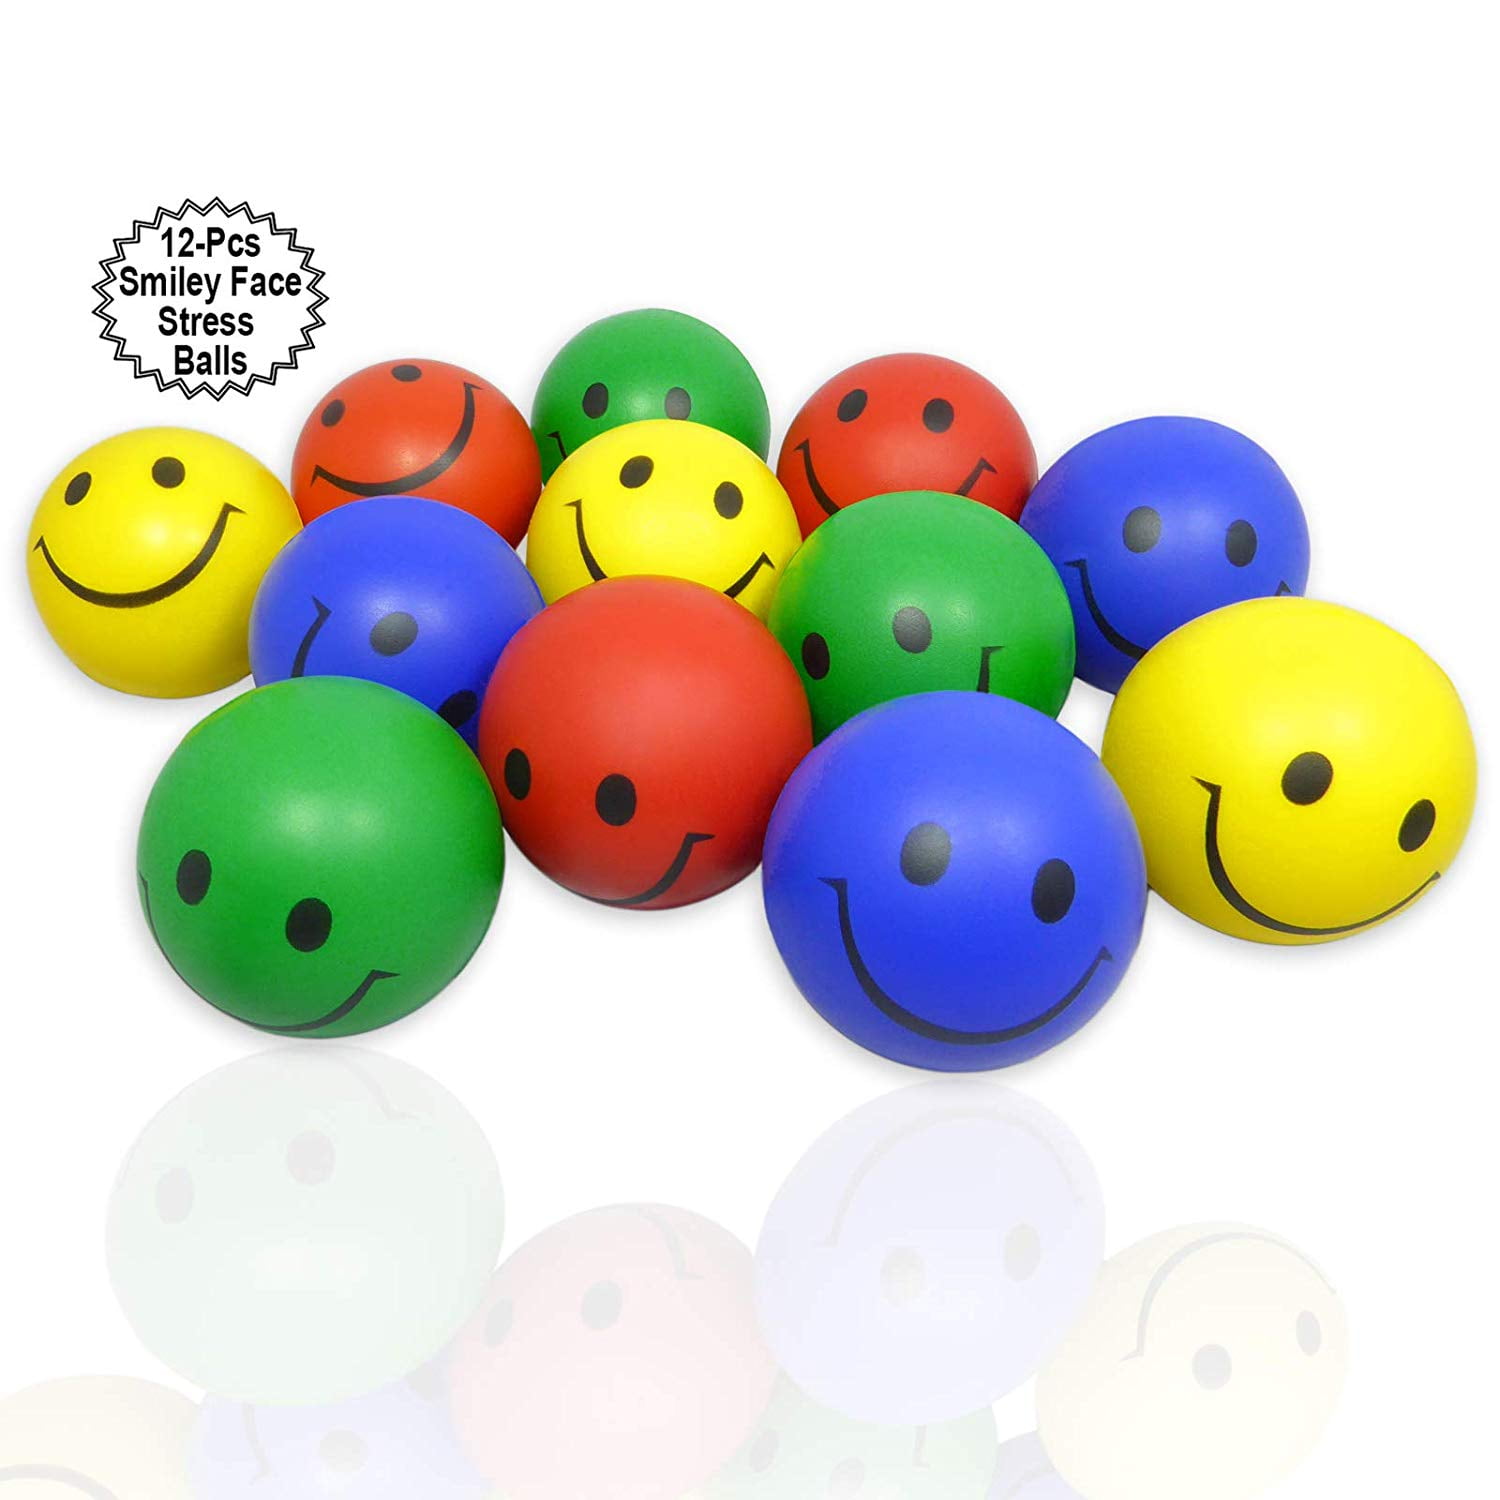 18 SMILE SMILEY FACE STRESS RELIEF BALLS 2" FOAM HAND THERAPY SQUEEZE TOY BALL 